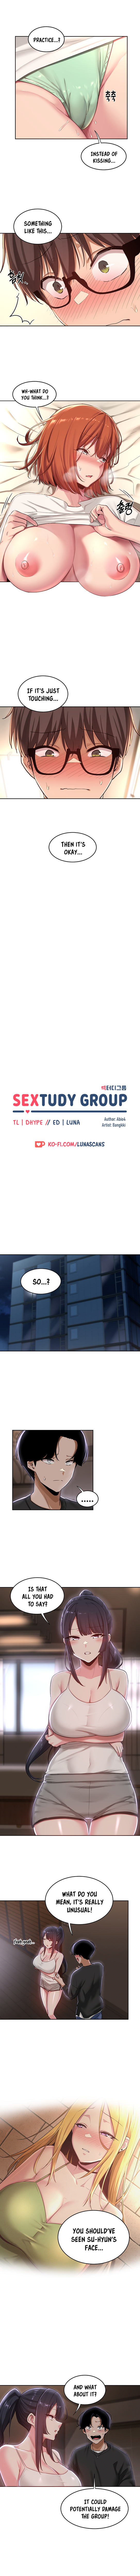 Panel Image 1 for chapter 33 of manhwa Sex Study Group on read.oppai.stream